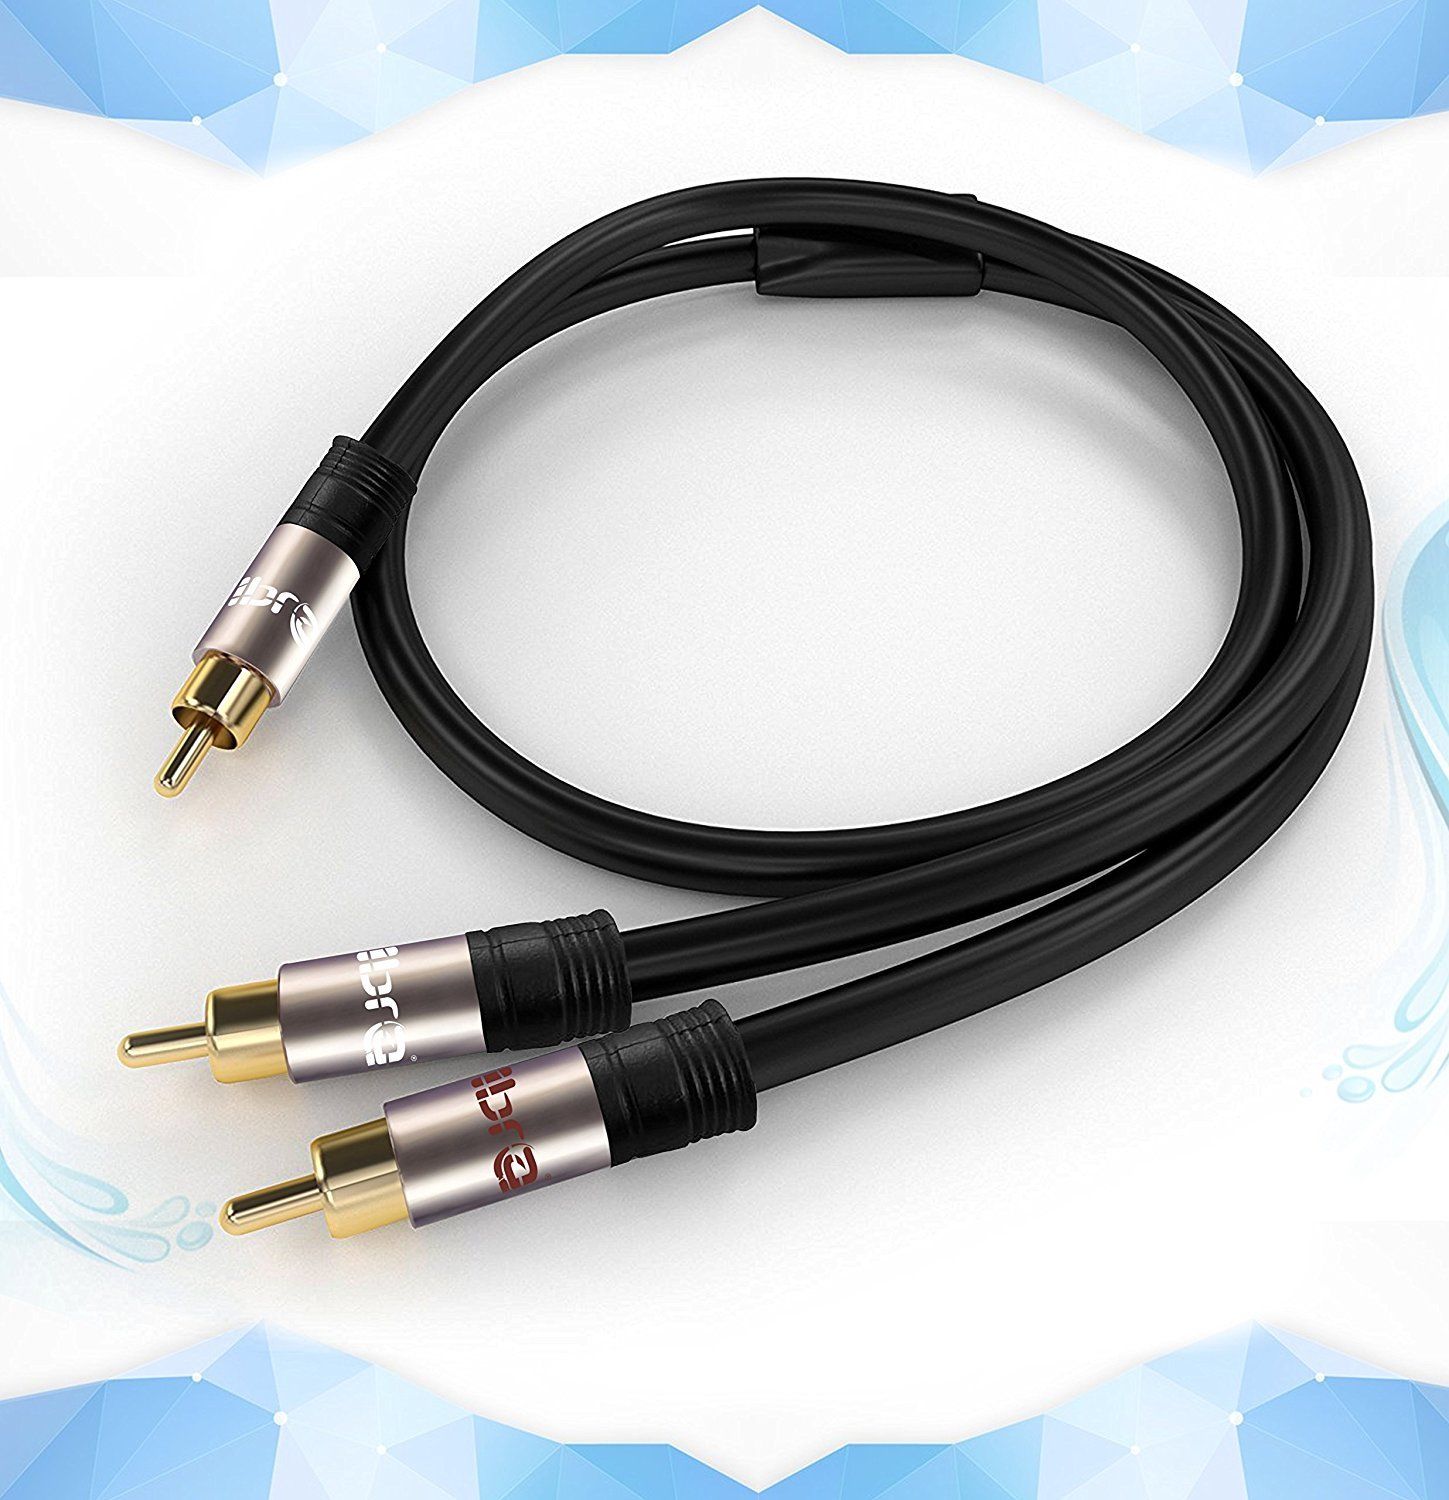 IBRA 5M Y Cable / Subwoofer Cable / Audio Cable / RCA Cable (1 x RCA to 2 x RCA) - GUN Metal Range